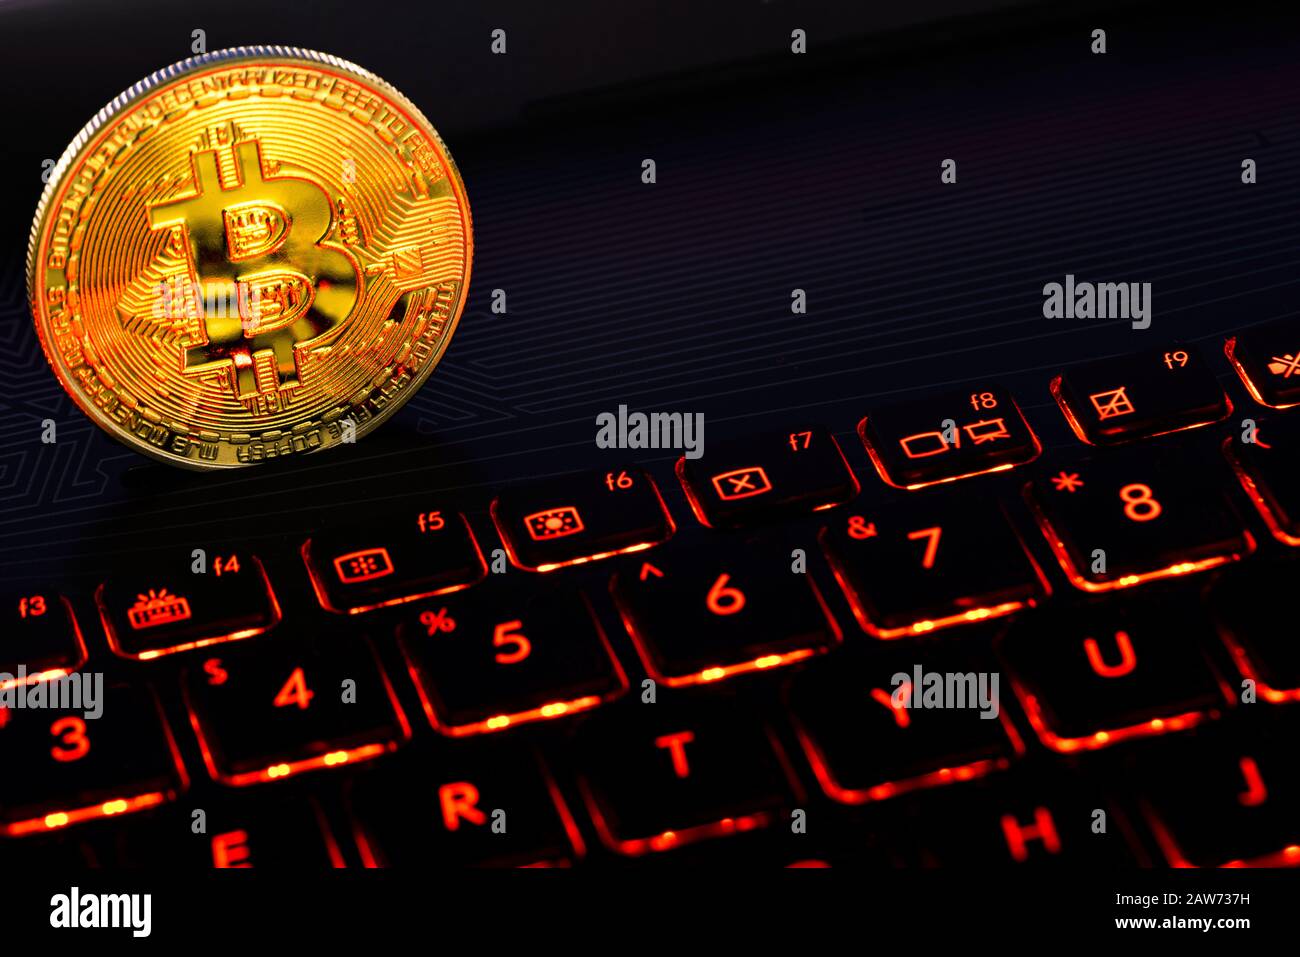 Gold bitcoin on the red keyboard notebook. A visual representation of digital cryptocurrencies. Bitcoin are fully dematerialized and decentralized ele Stock Photo